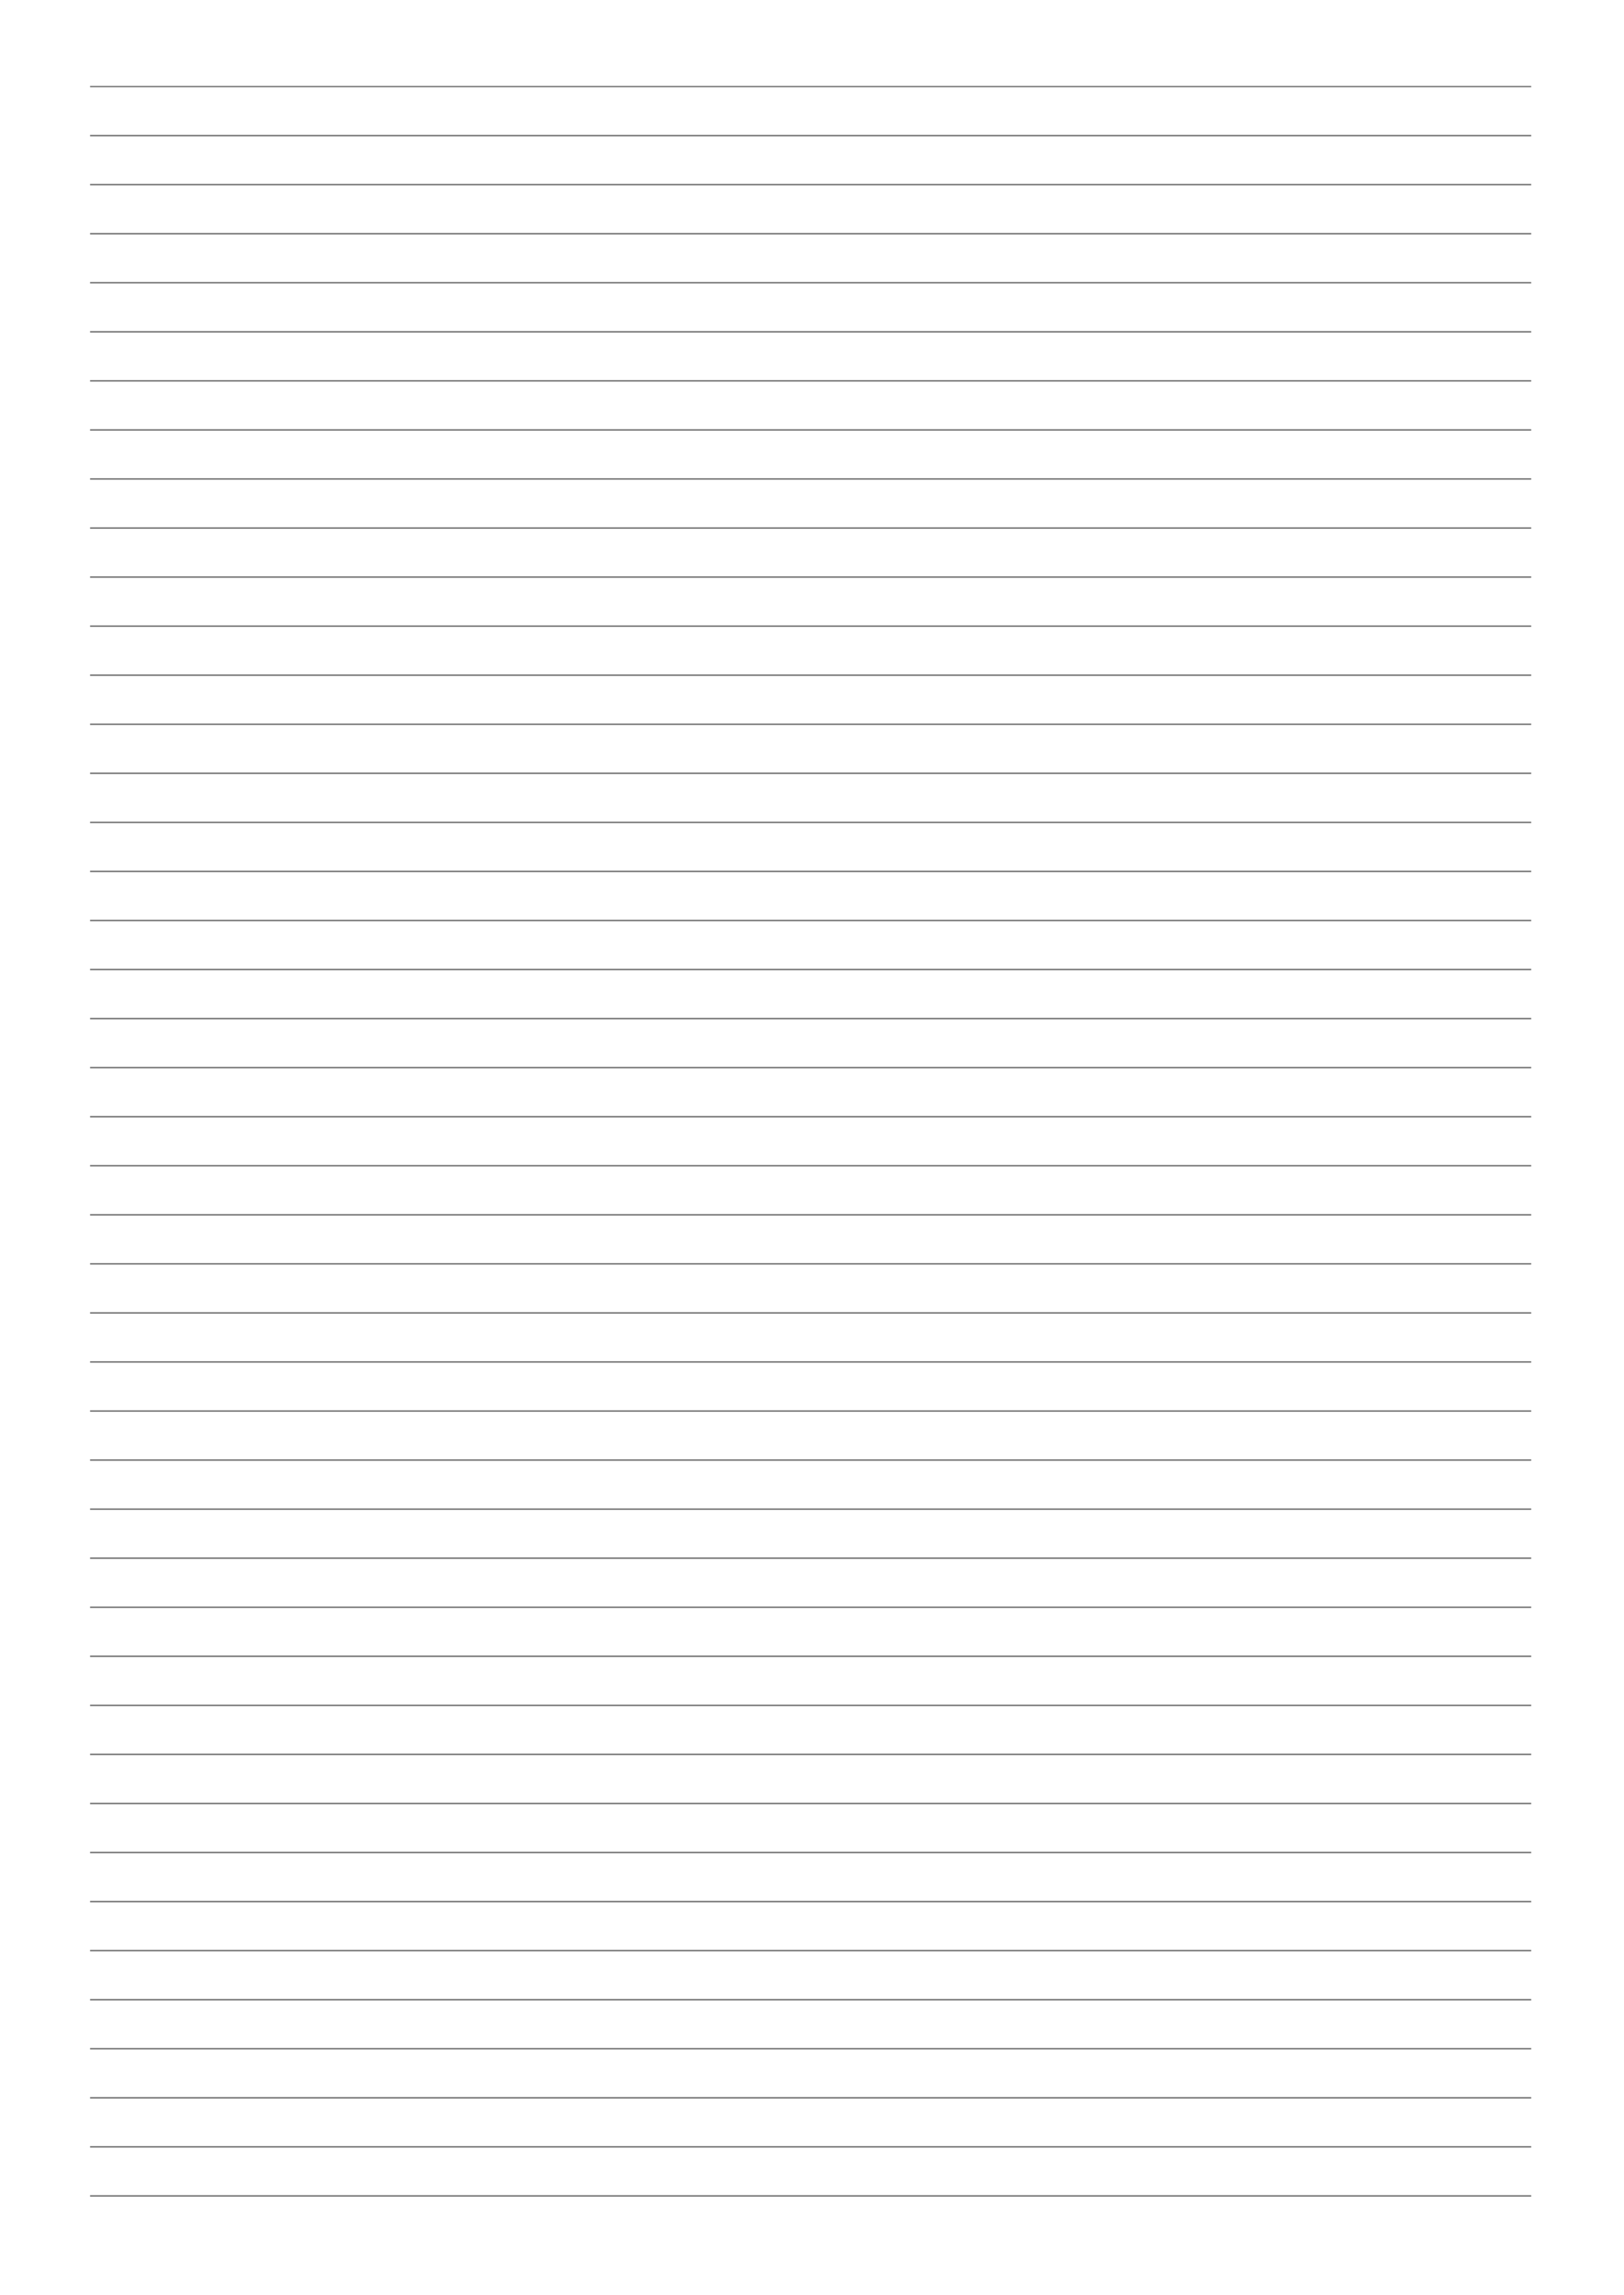 Printable Lined Paper Template Narrow Ruled 1 4 Inch PDF Download 